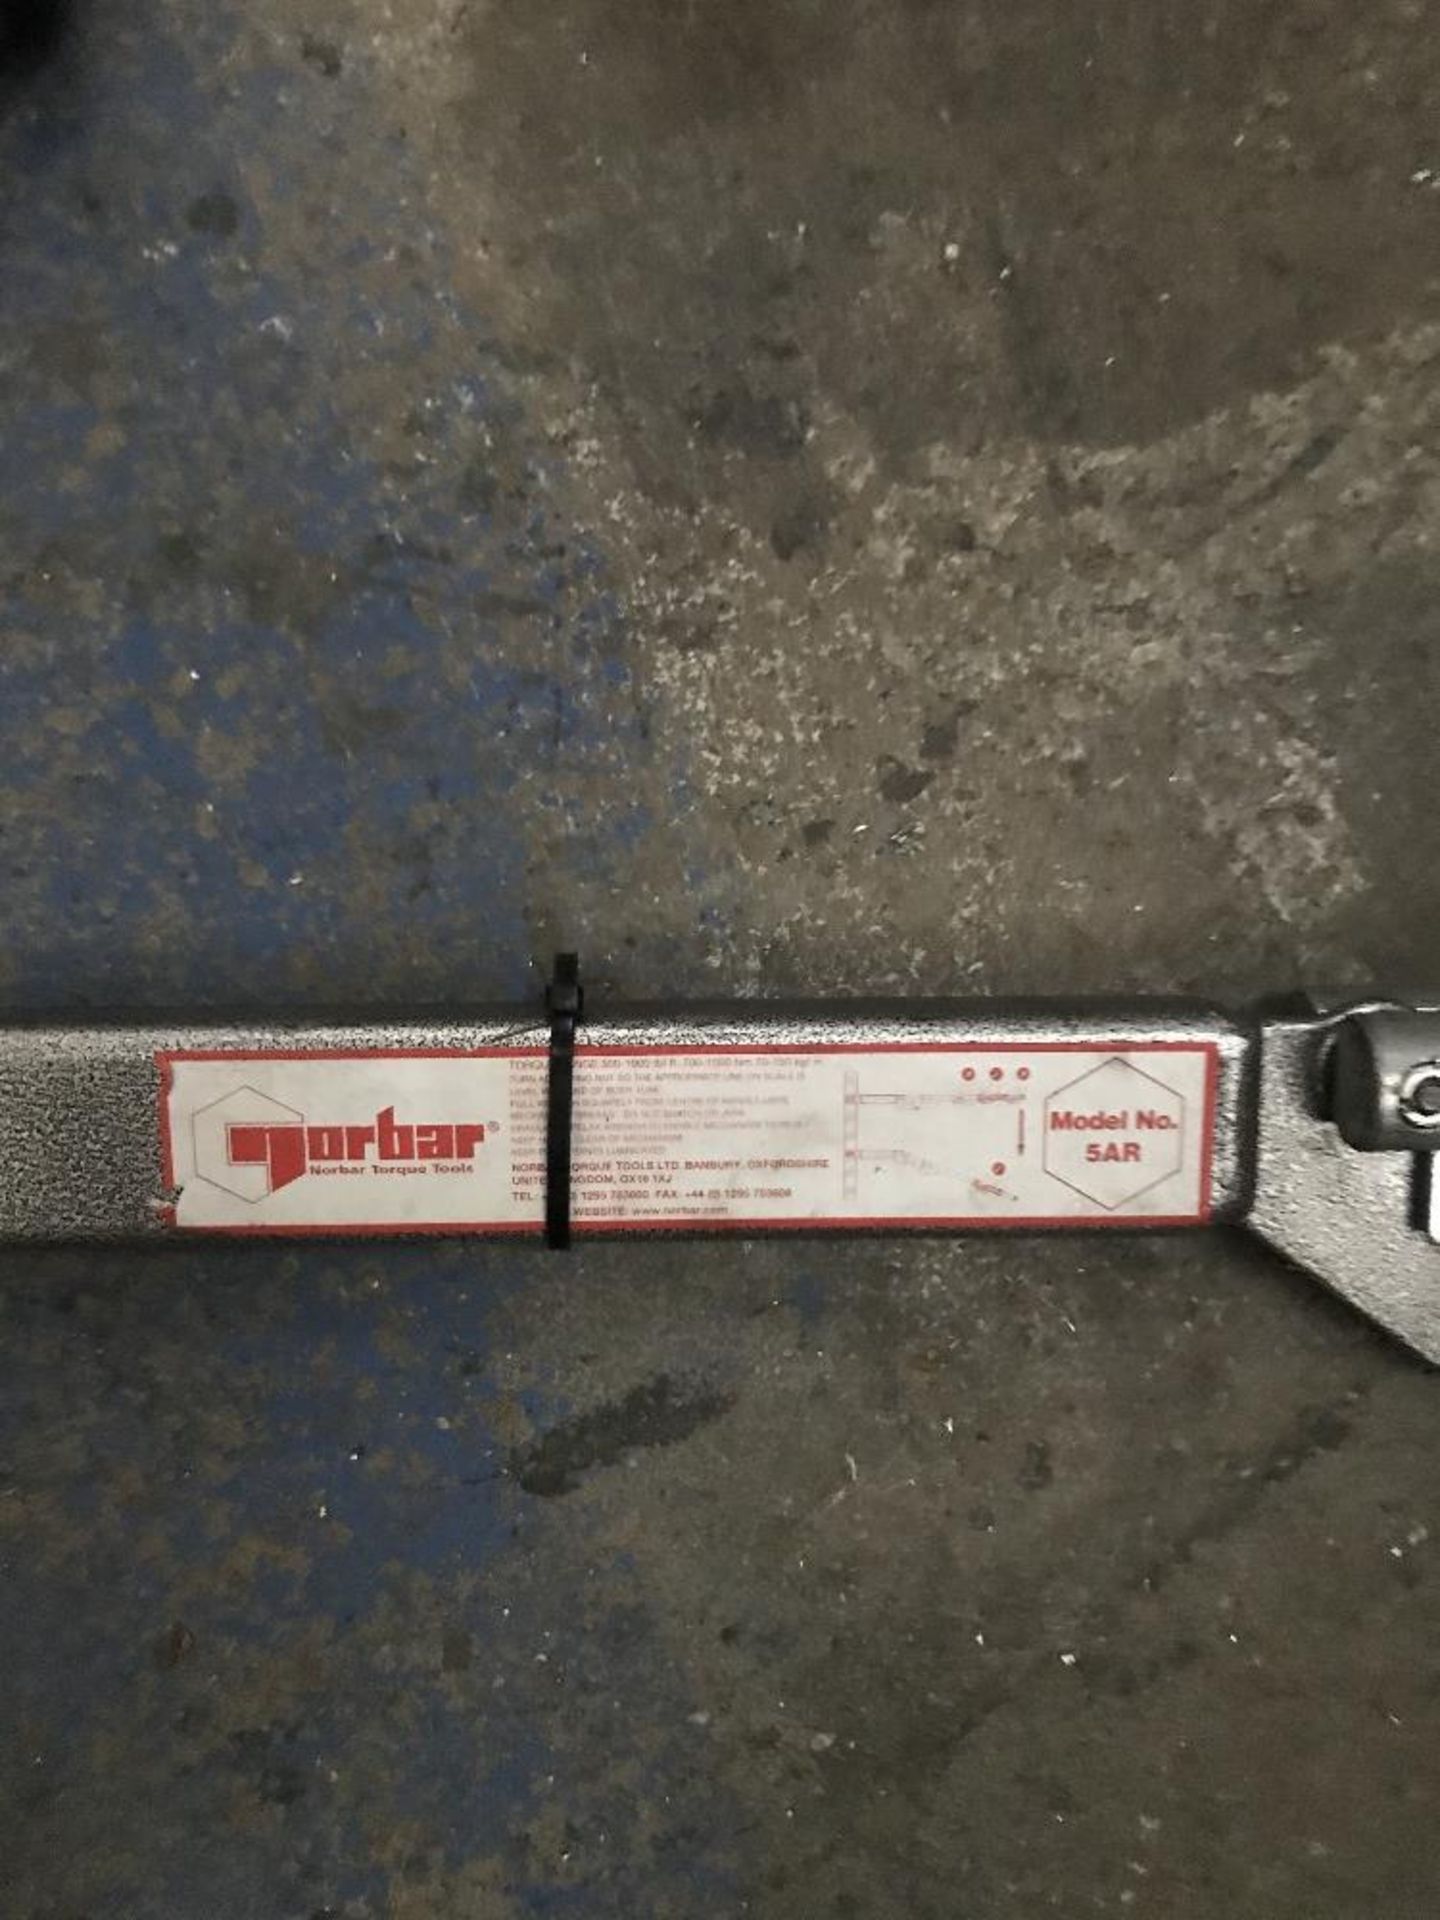 Norbar 5AR Torque Wrench - Image 2 of 2